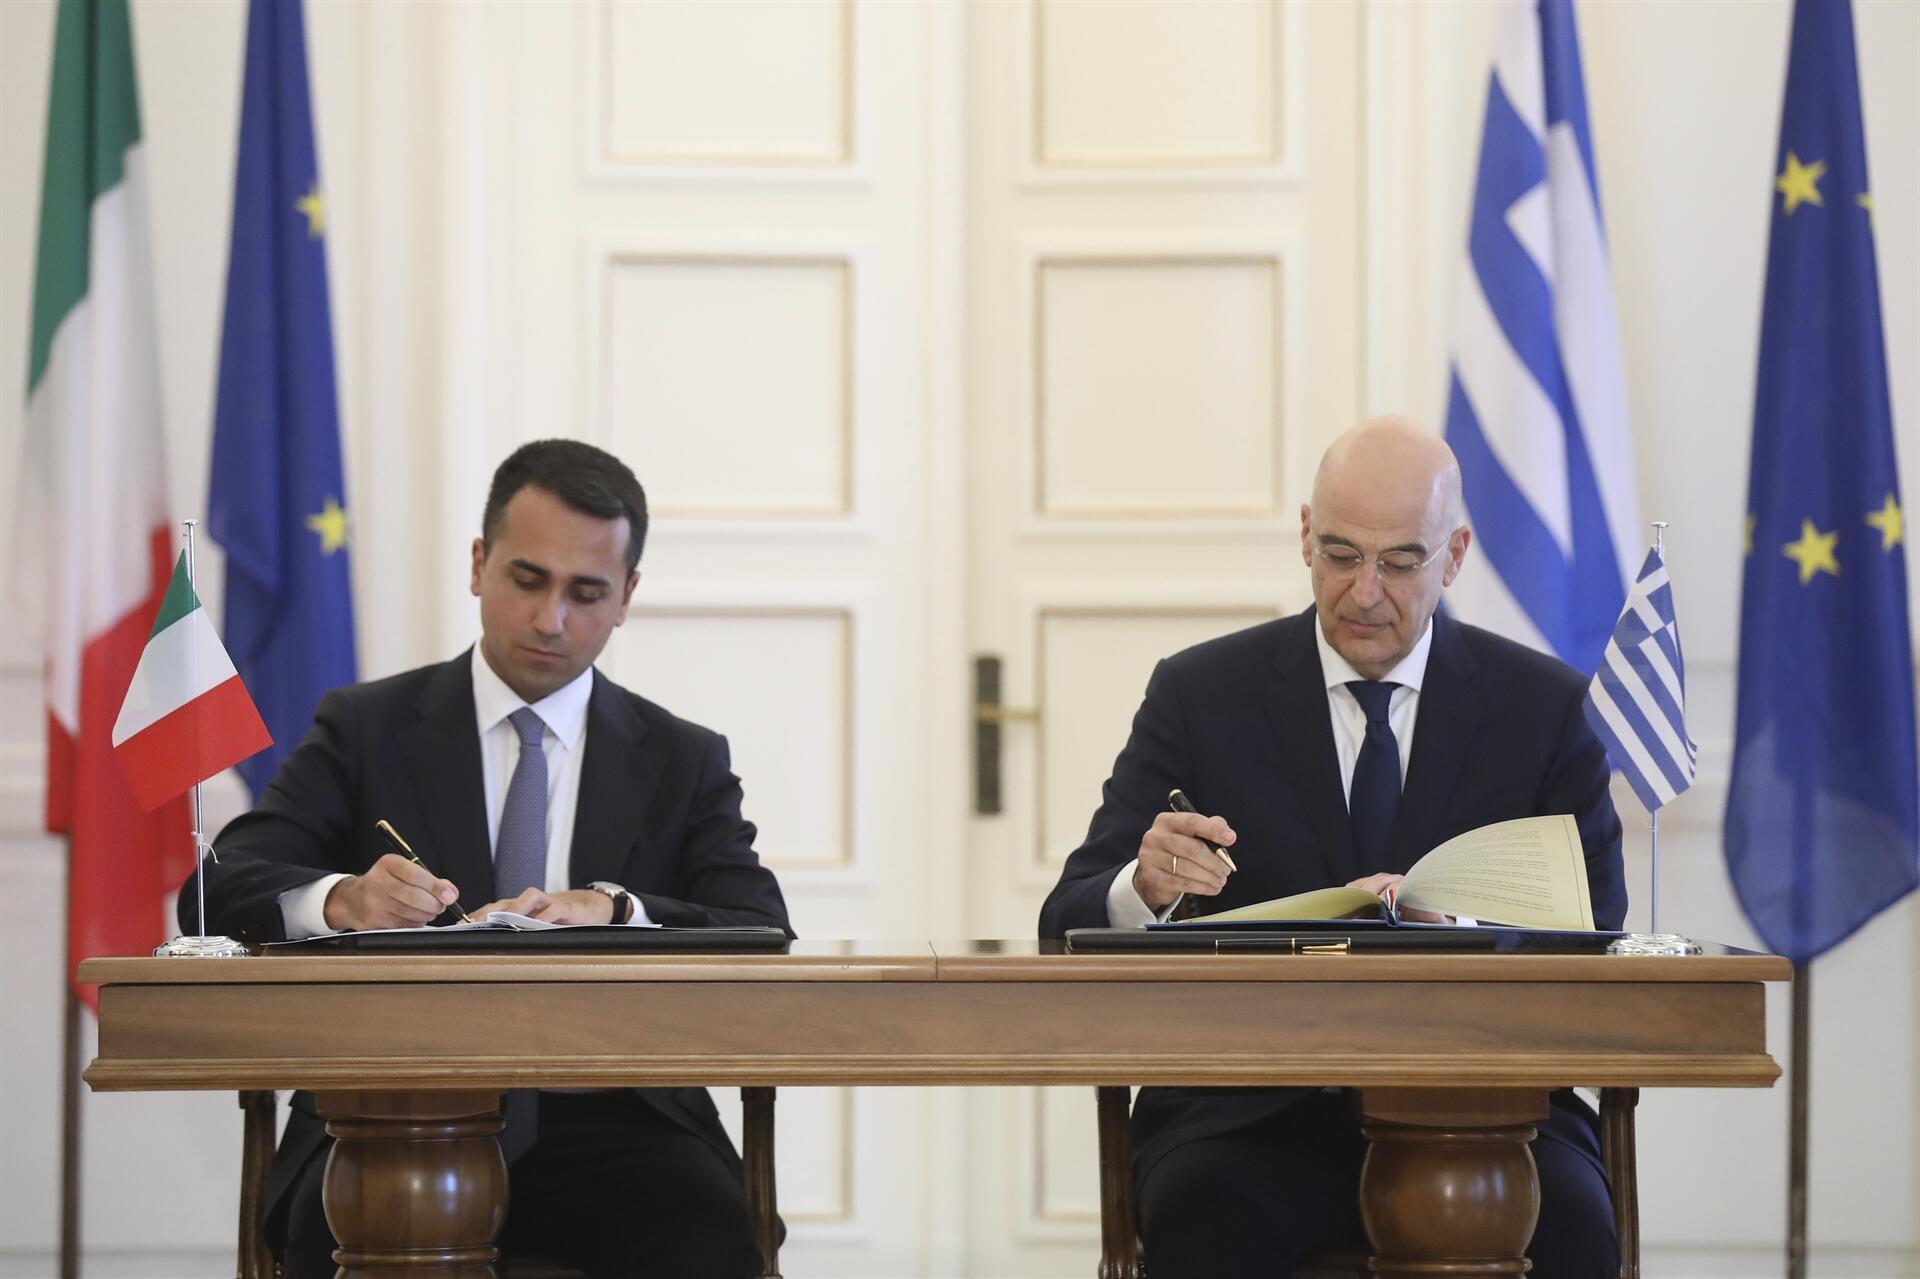 Greece, Italy sign maritime zone accord - Latest News